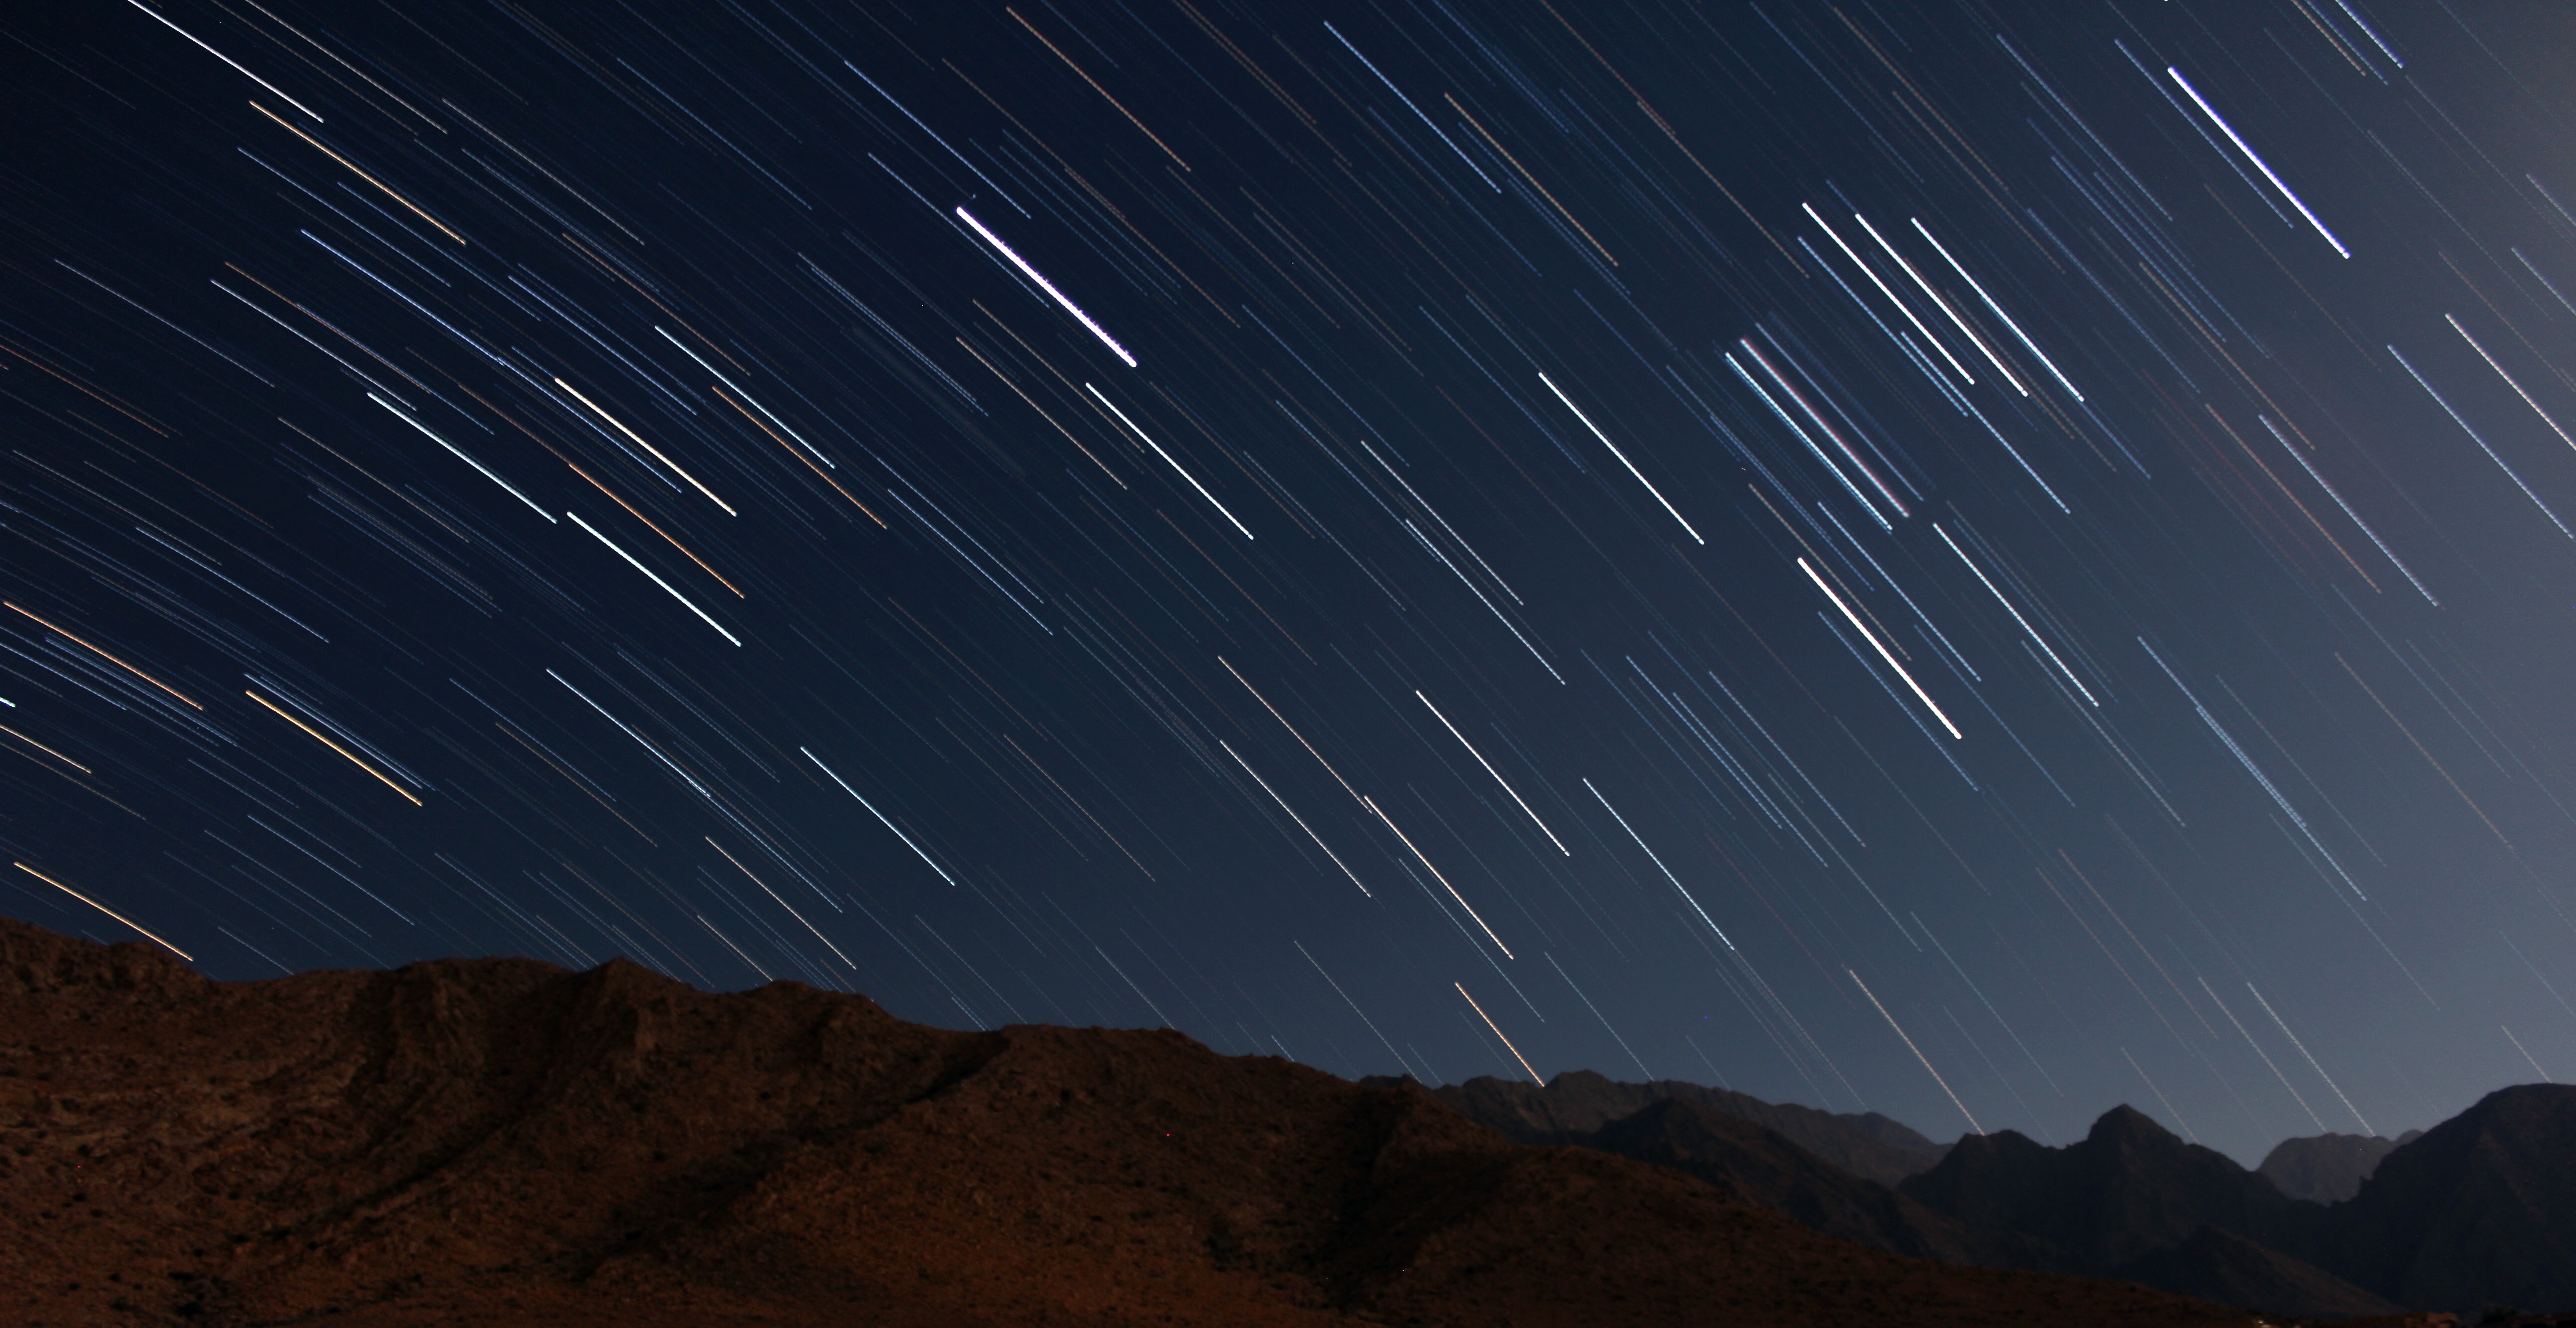 General 5184x2672 mountains sky stars long exposure nature outdoors